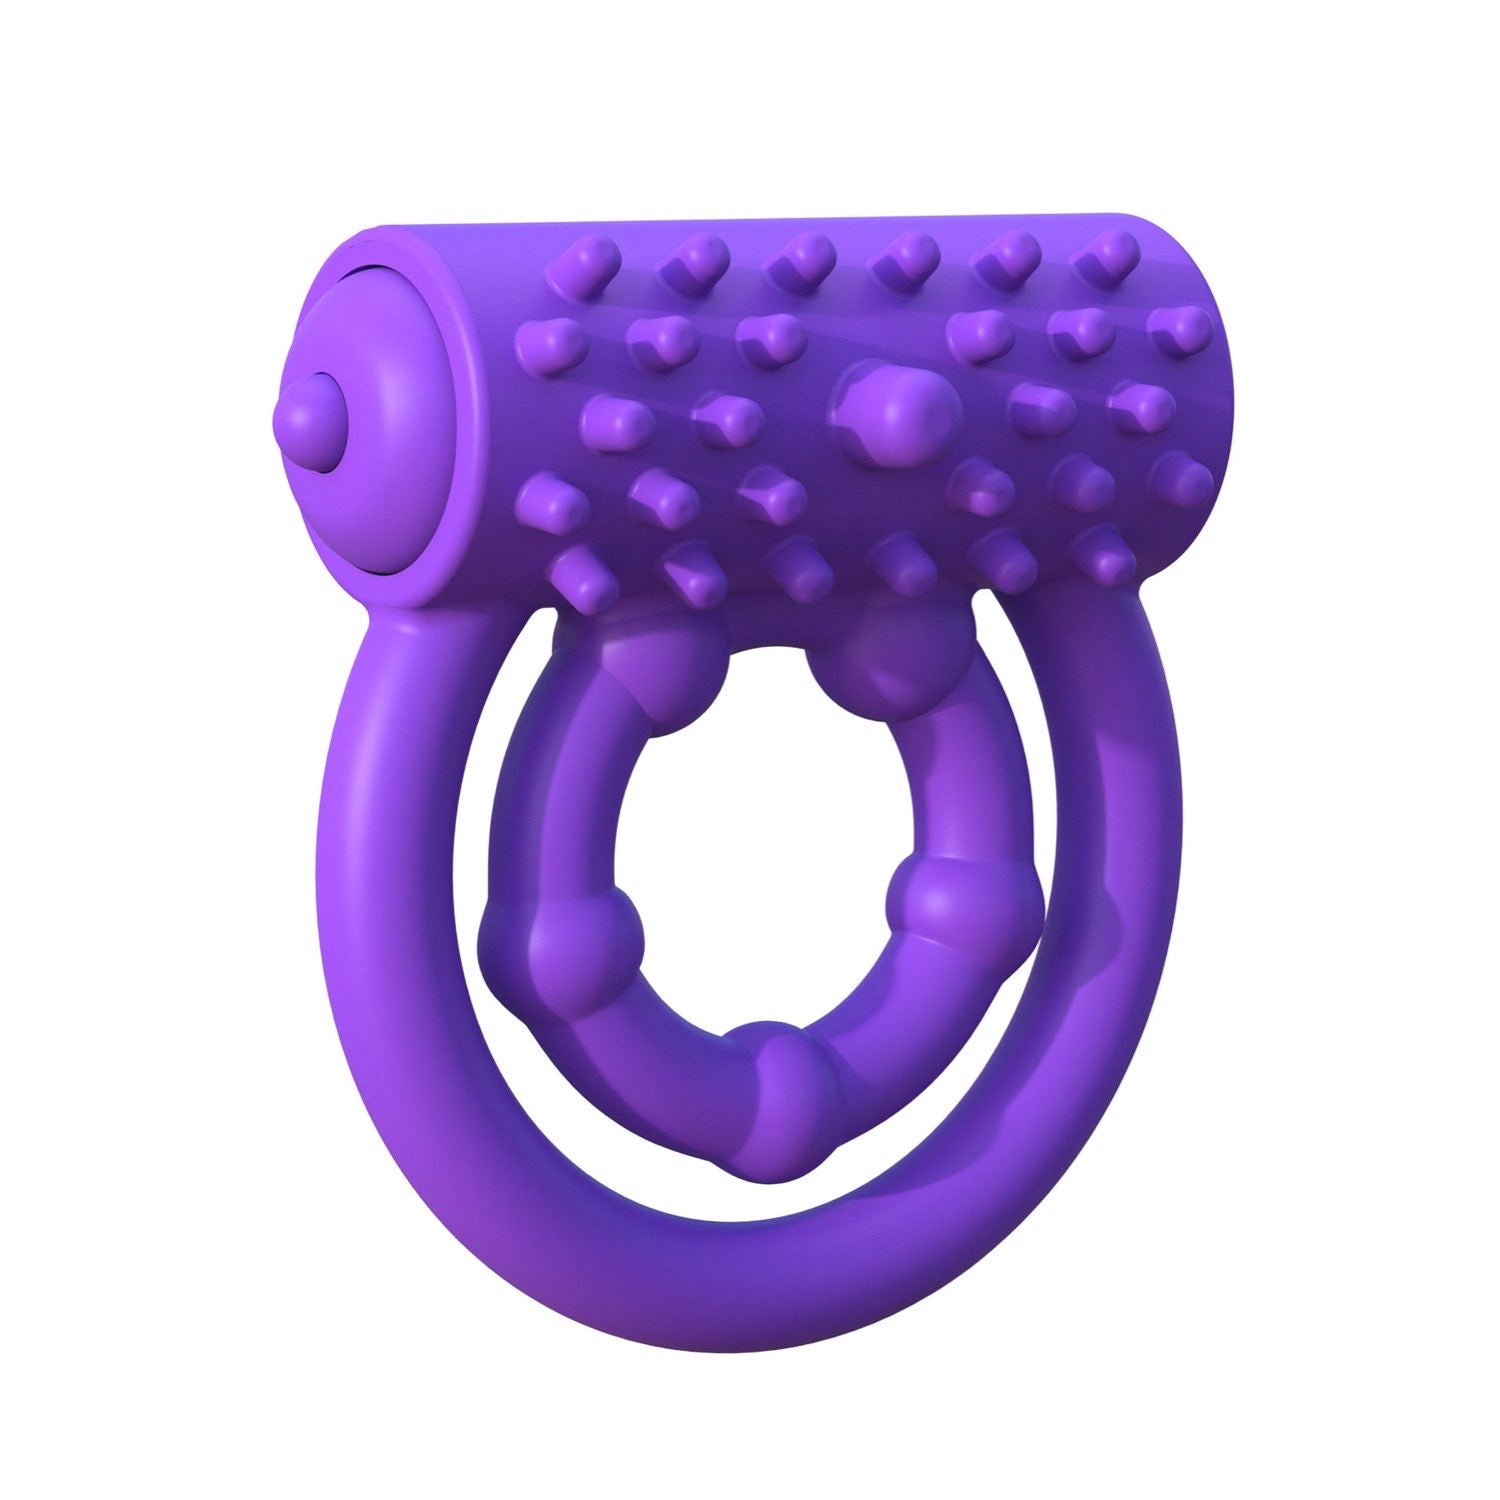 Fantasy C-Ringz Vibrating Prolong Performance Ring - Purple Vibrating Cock &amp; Ball Rings by Pipedream